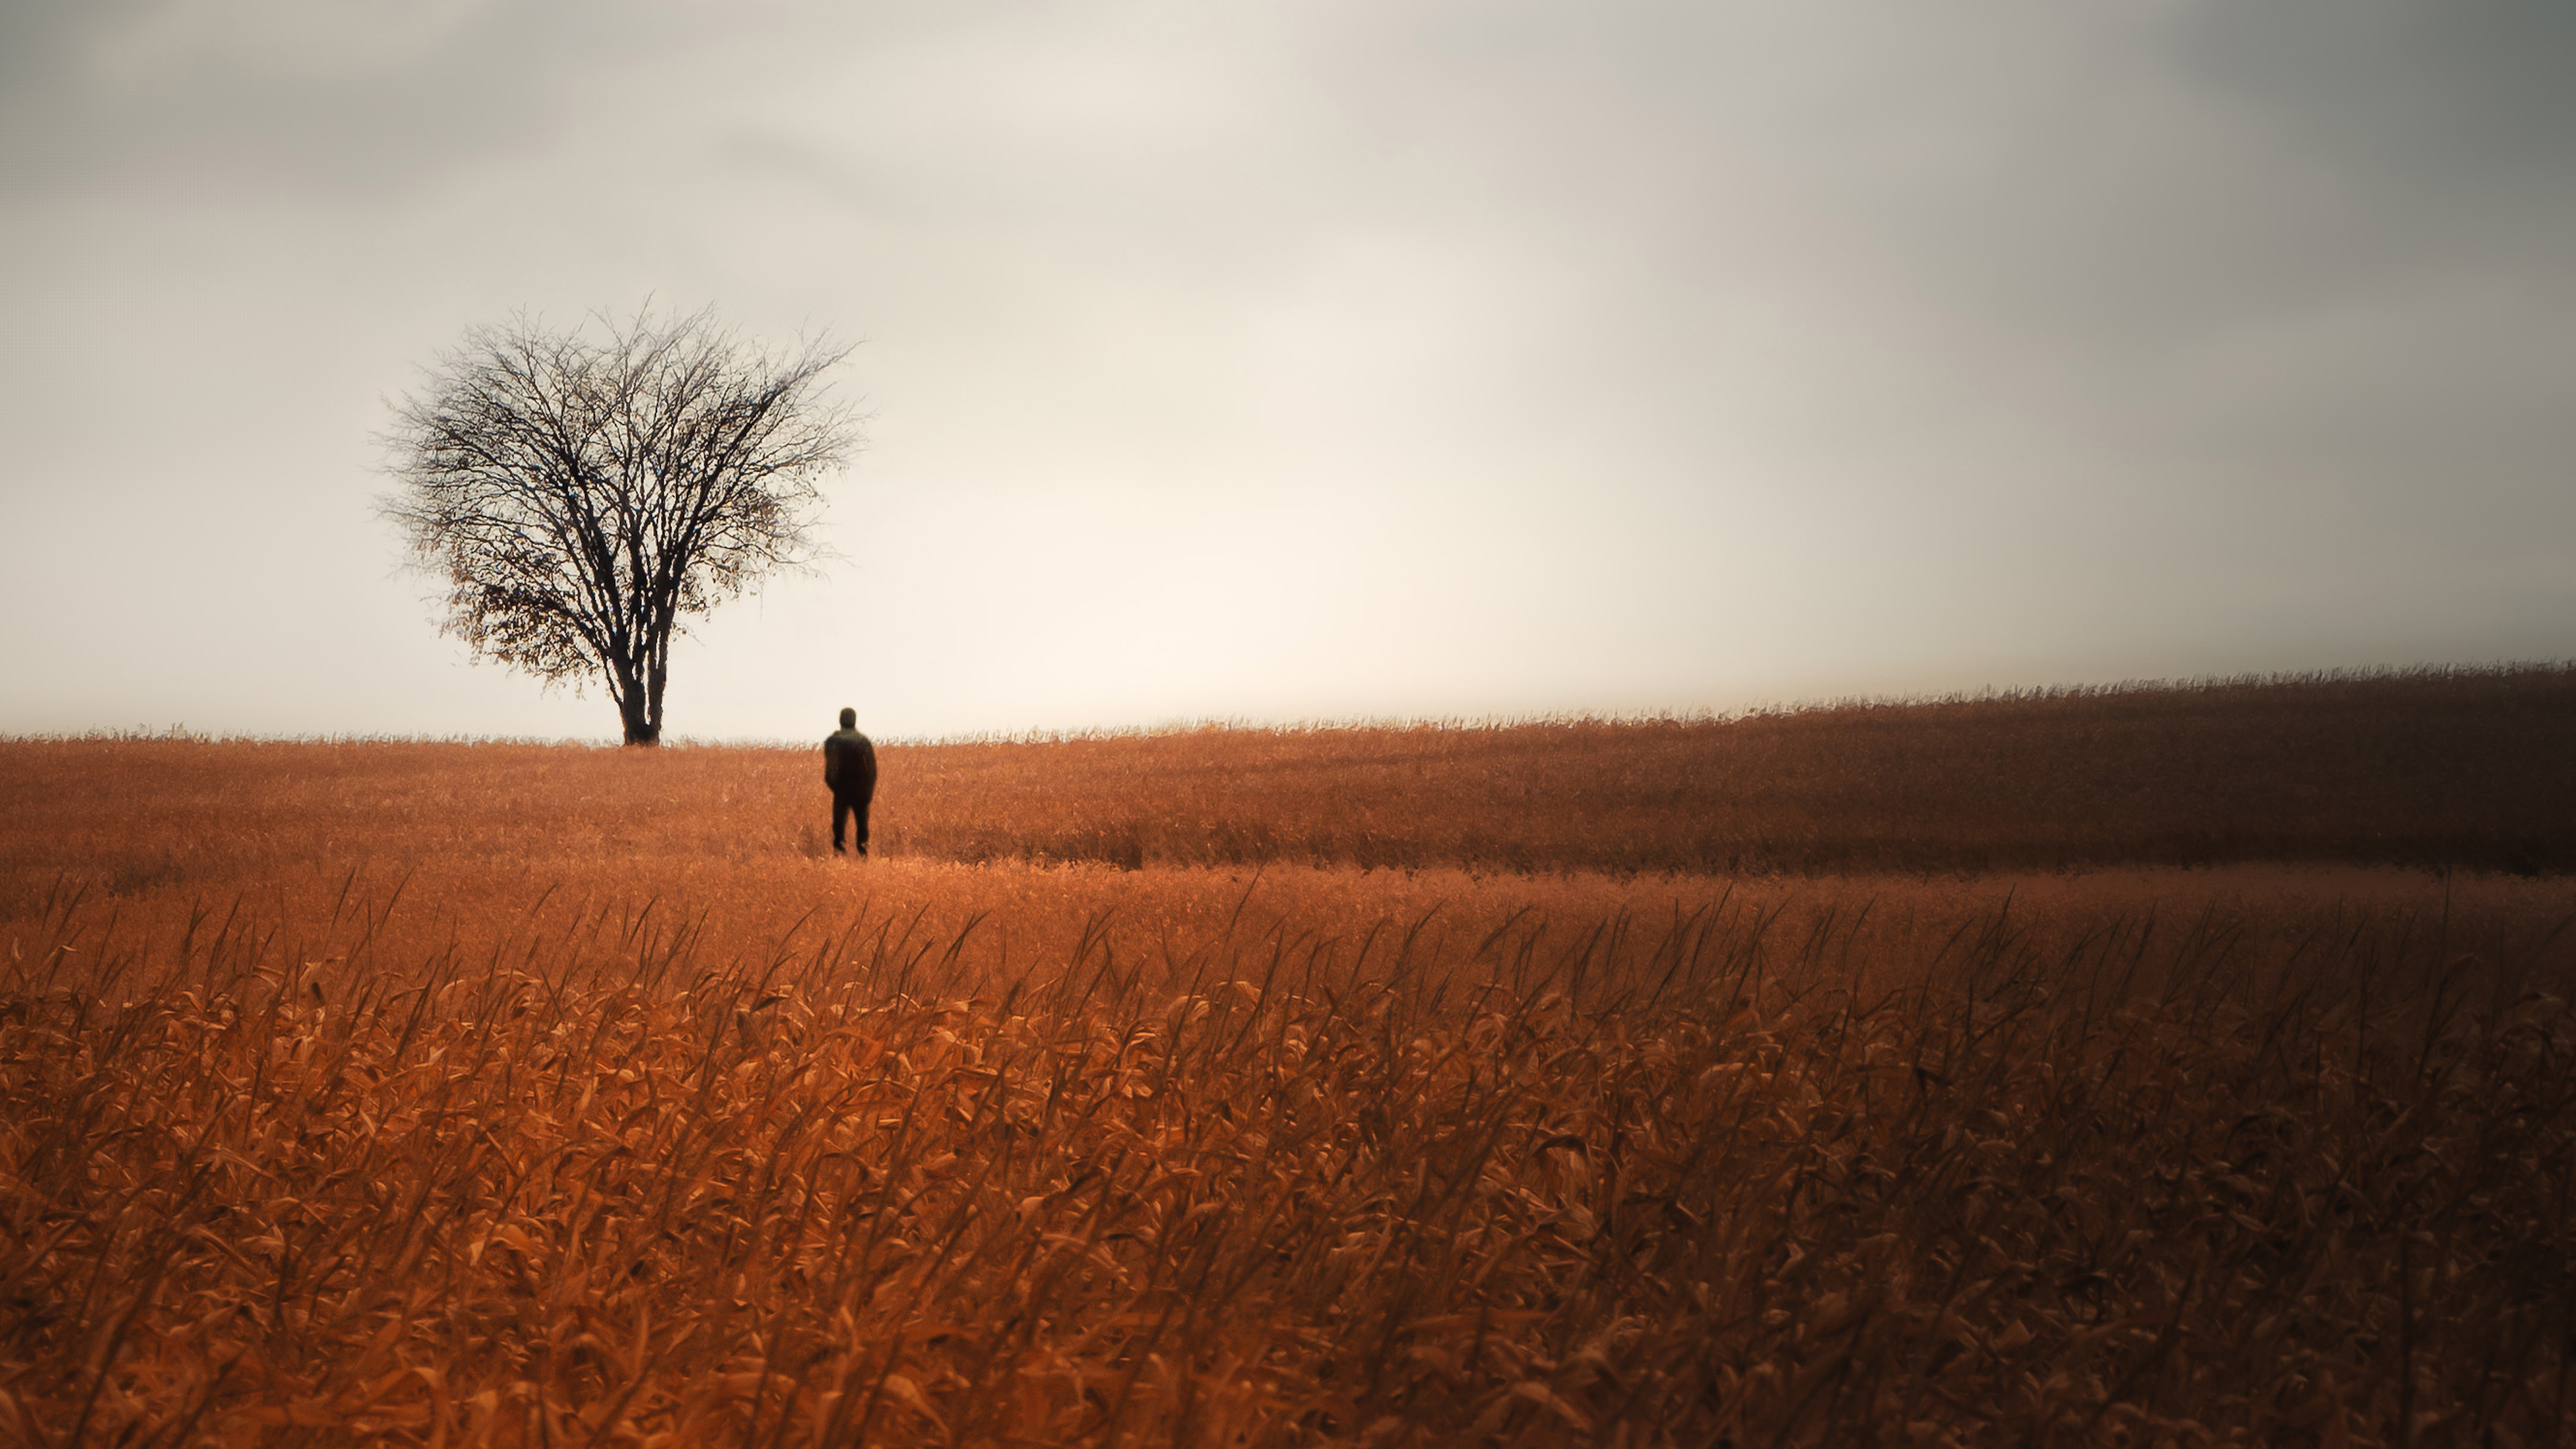 Person standing alone in a field of wheat